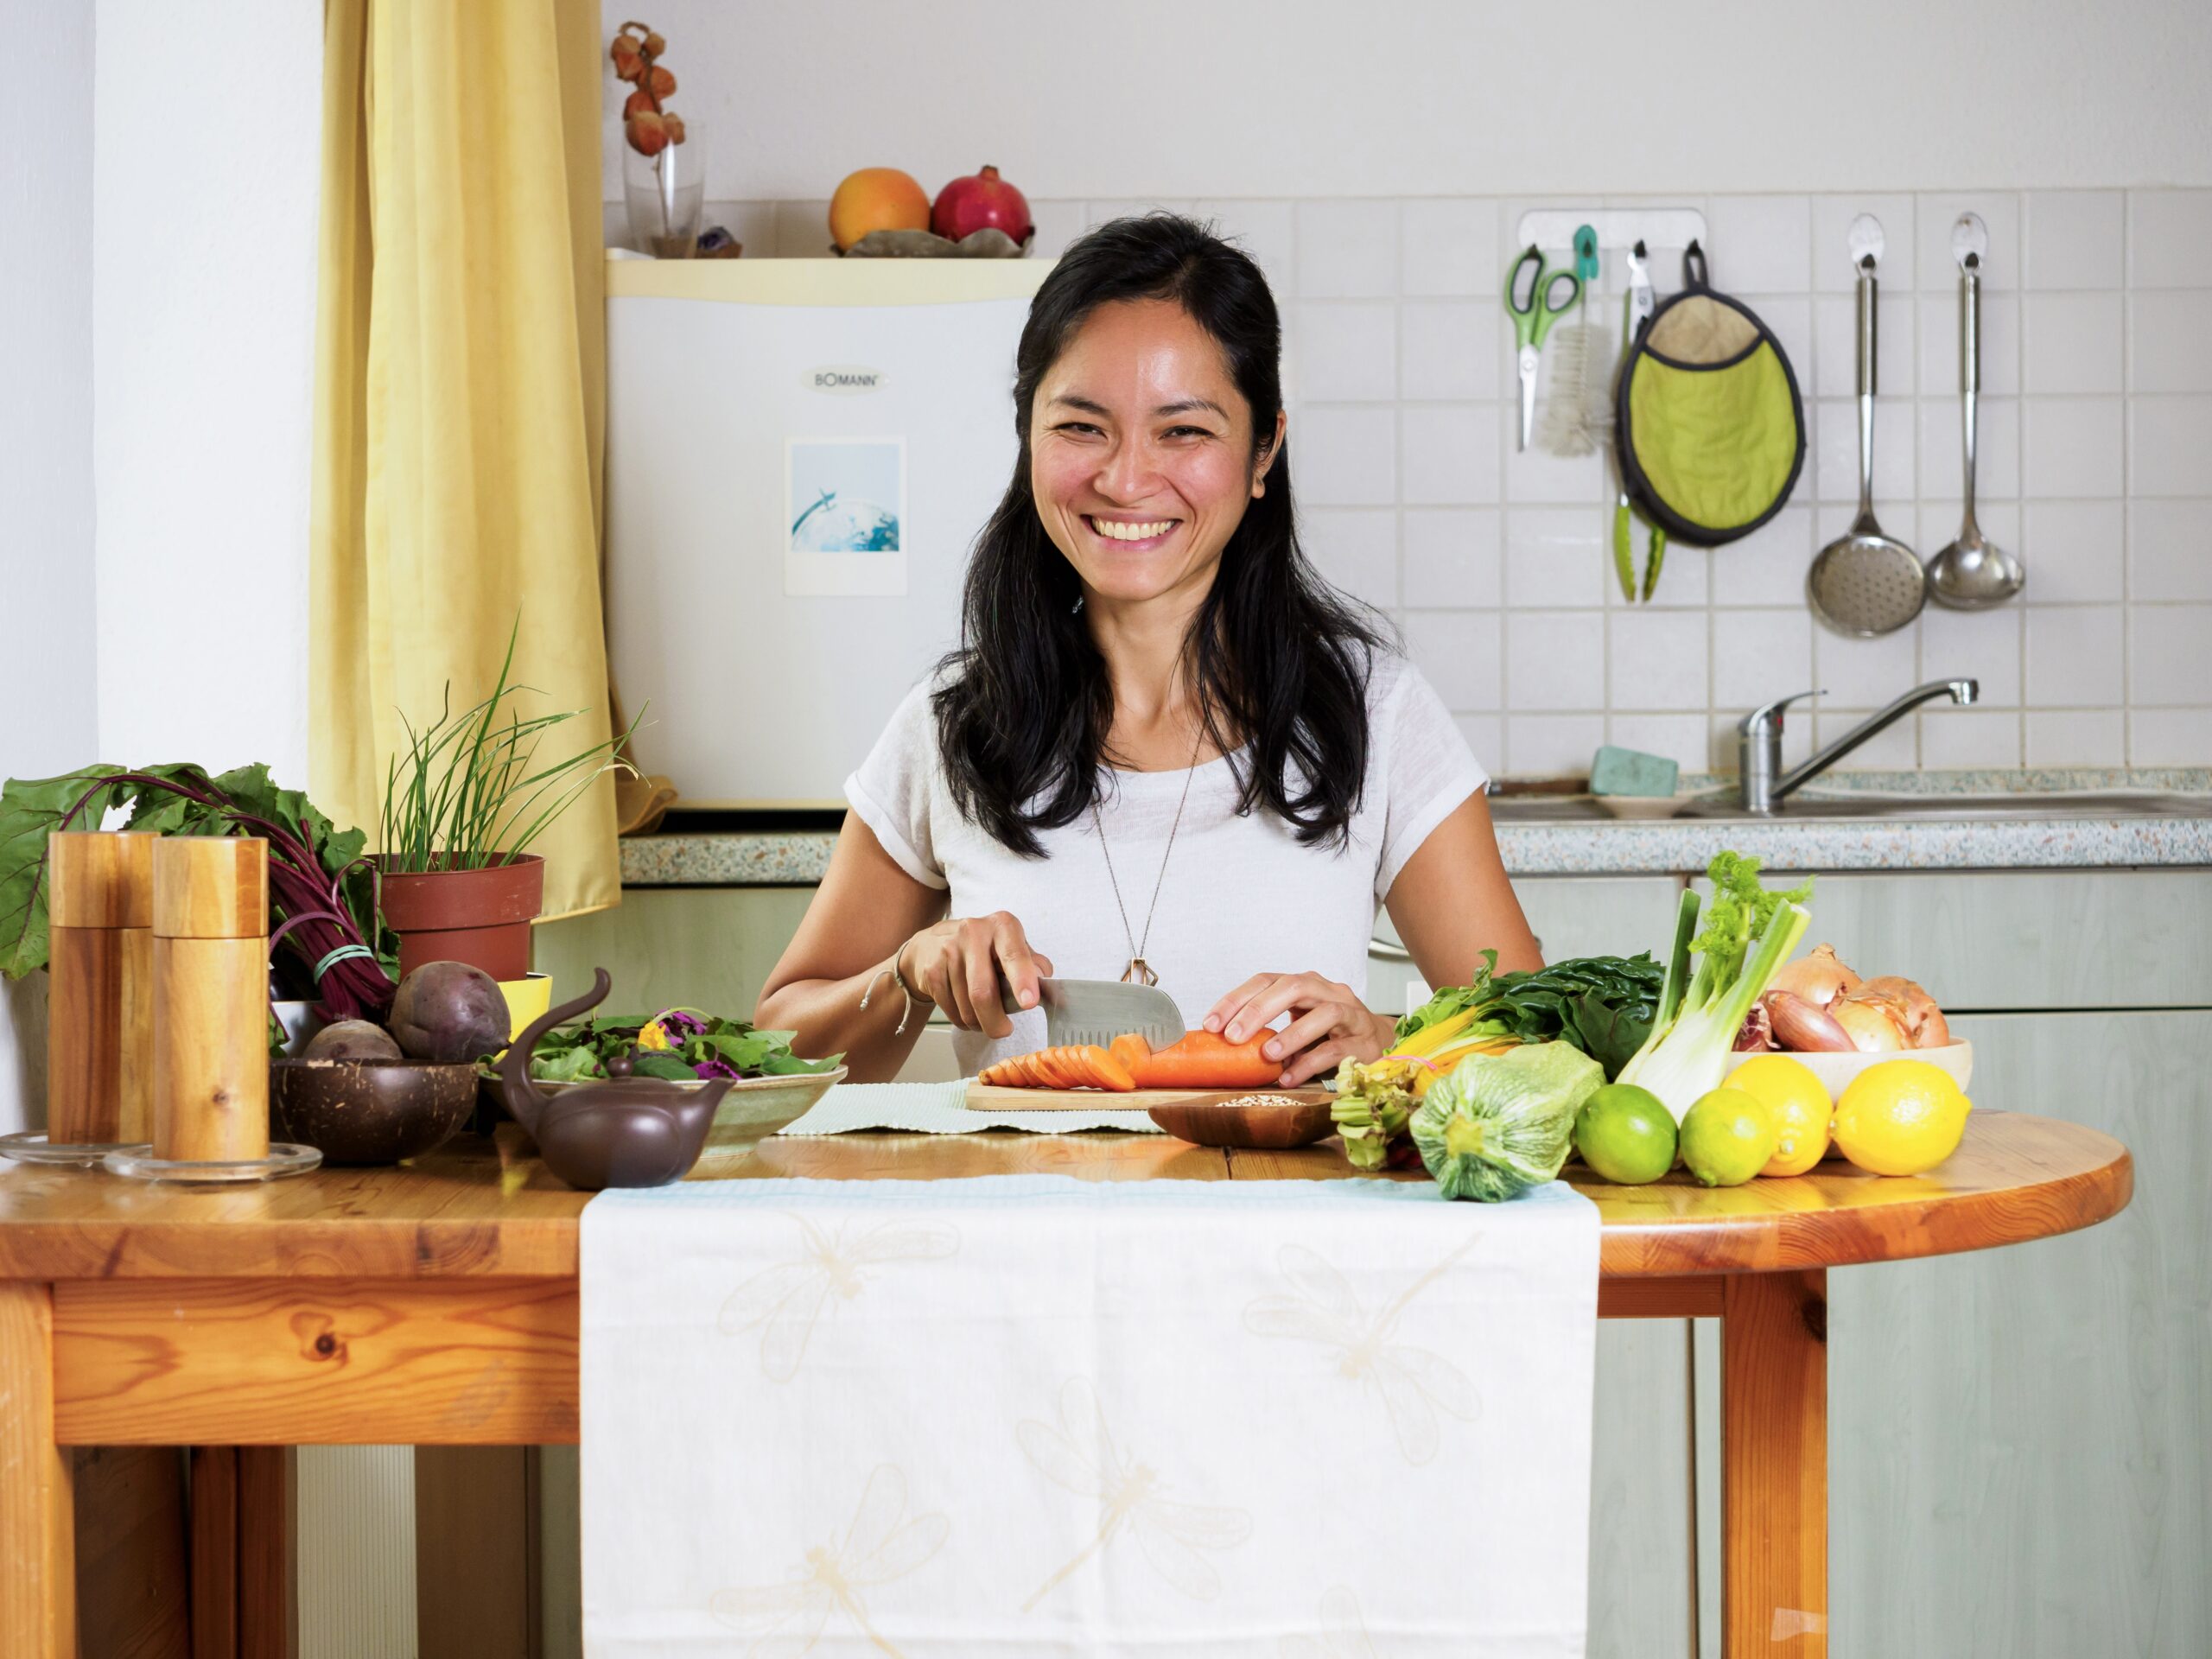 Linh nutritionist cutting vegetables front